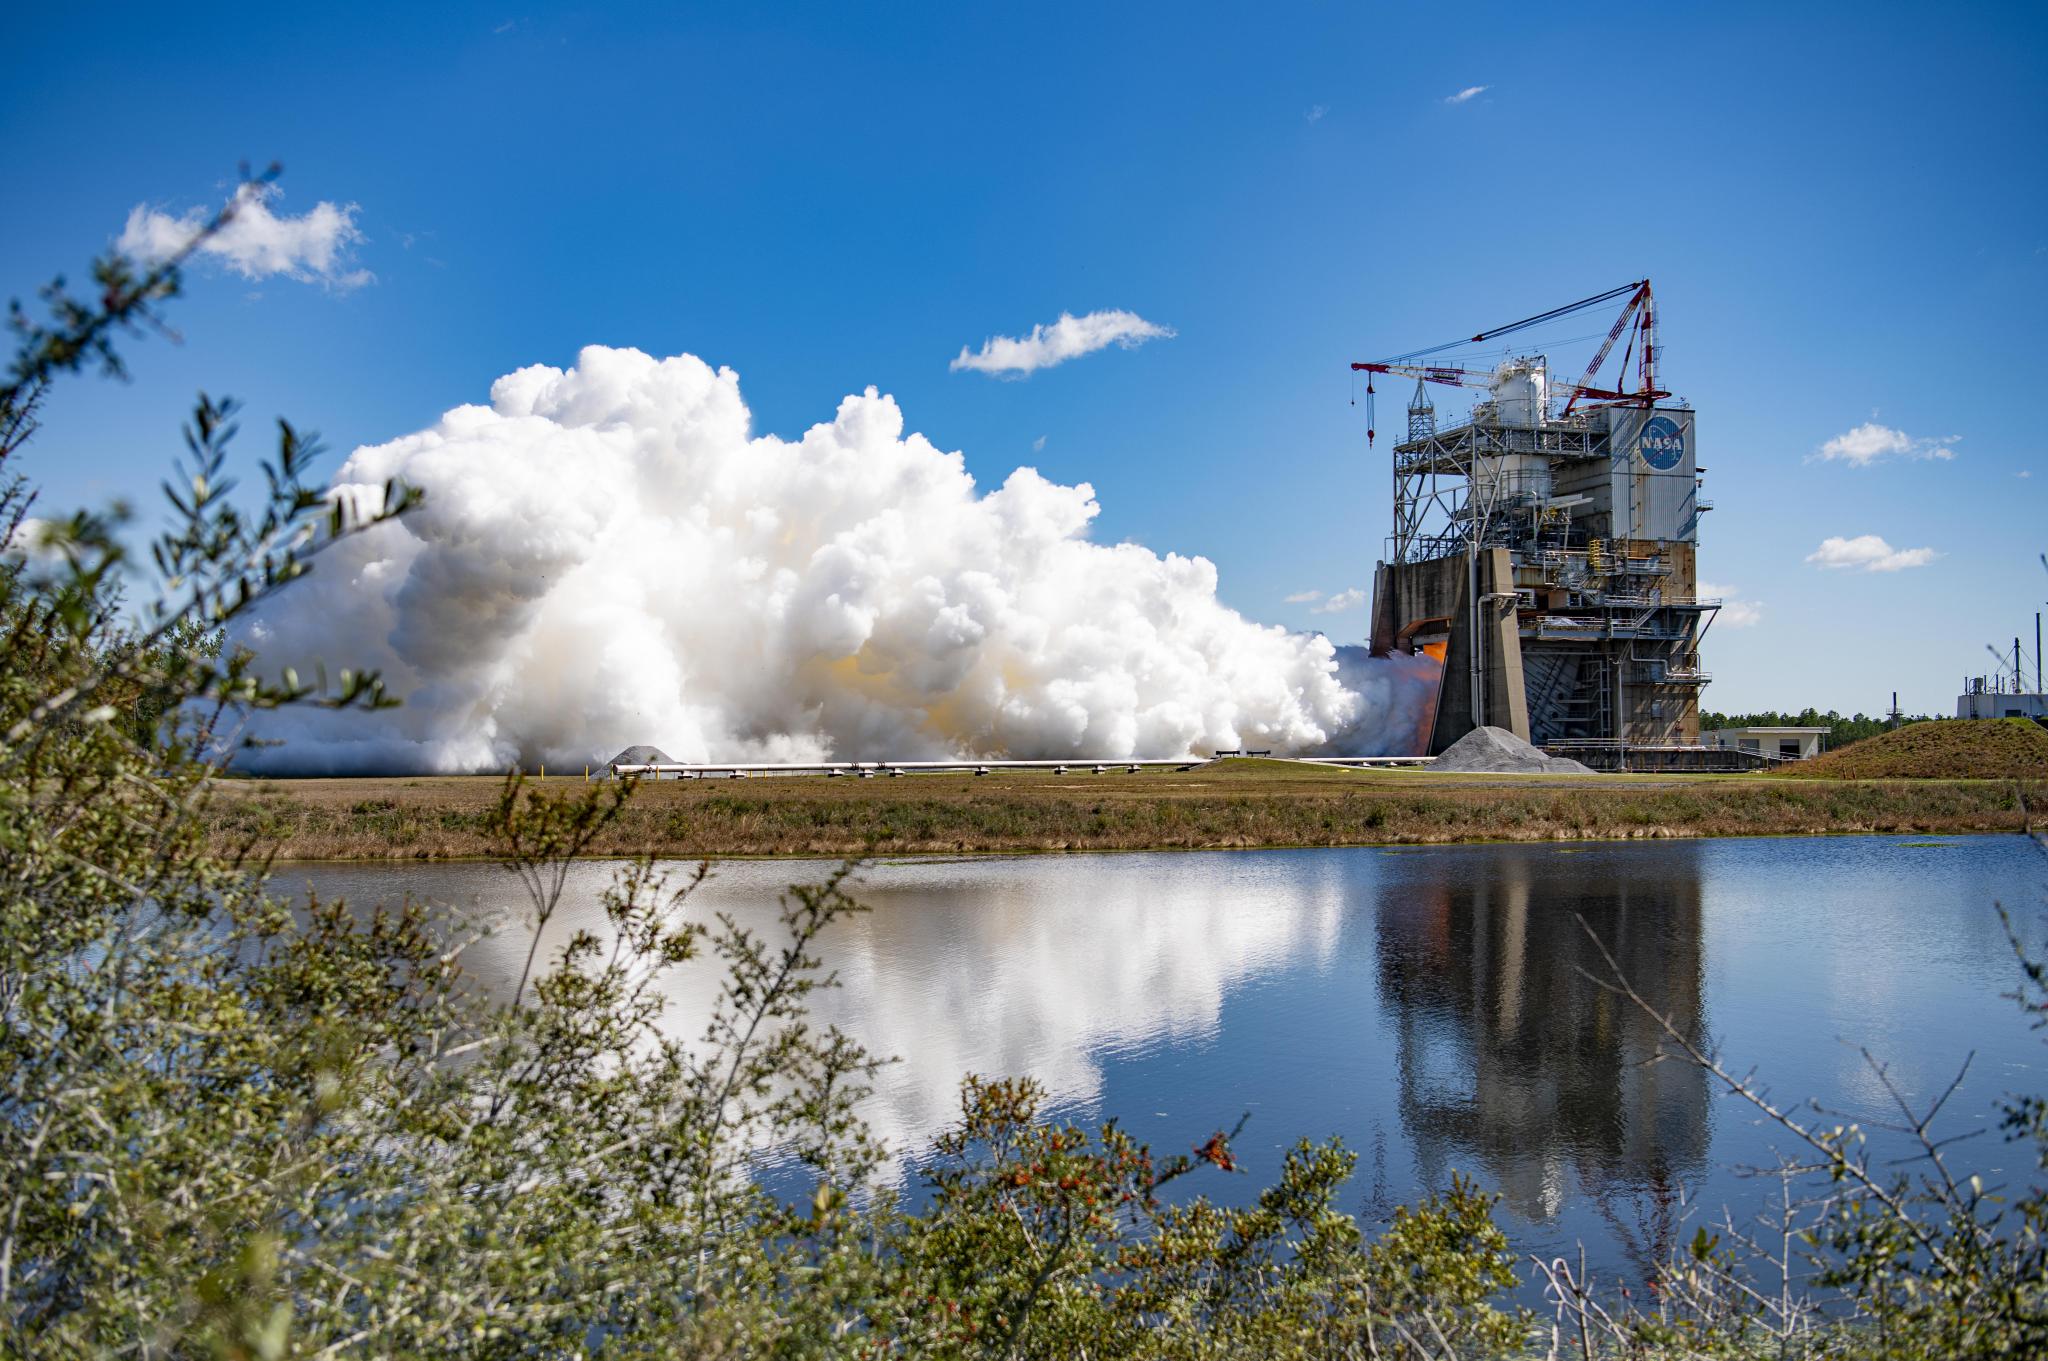 full-duration RS-25 engine hot fire is seen in the background